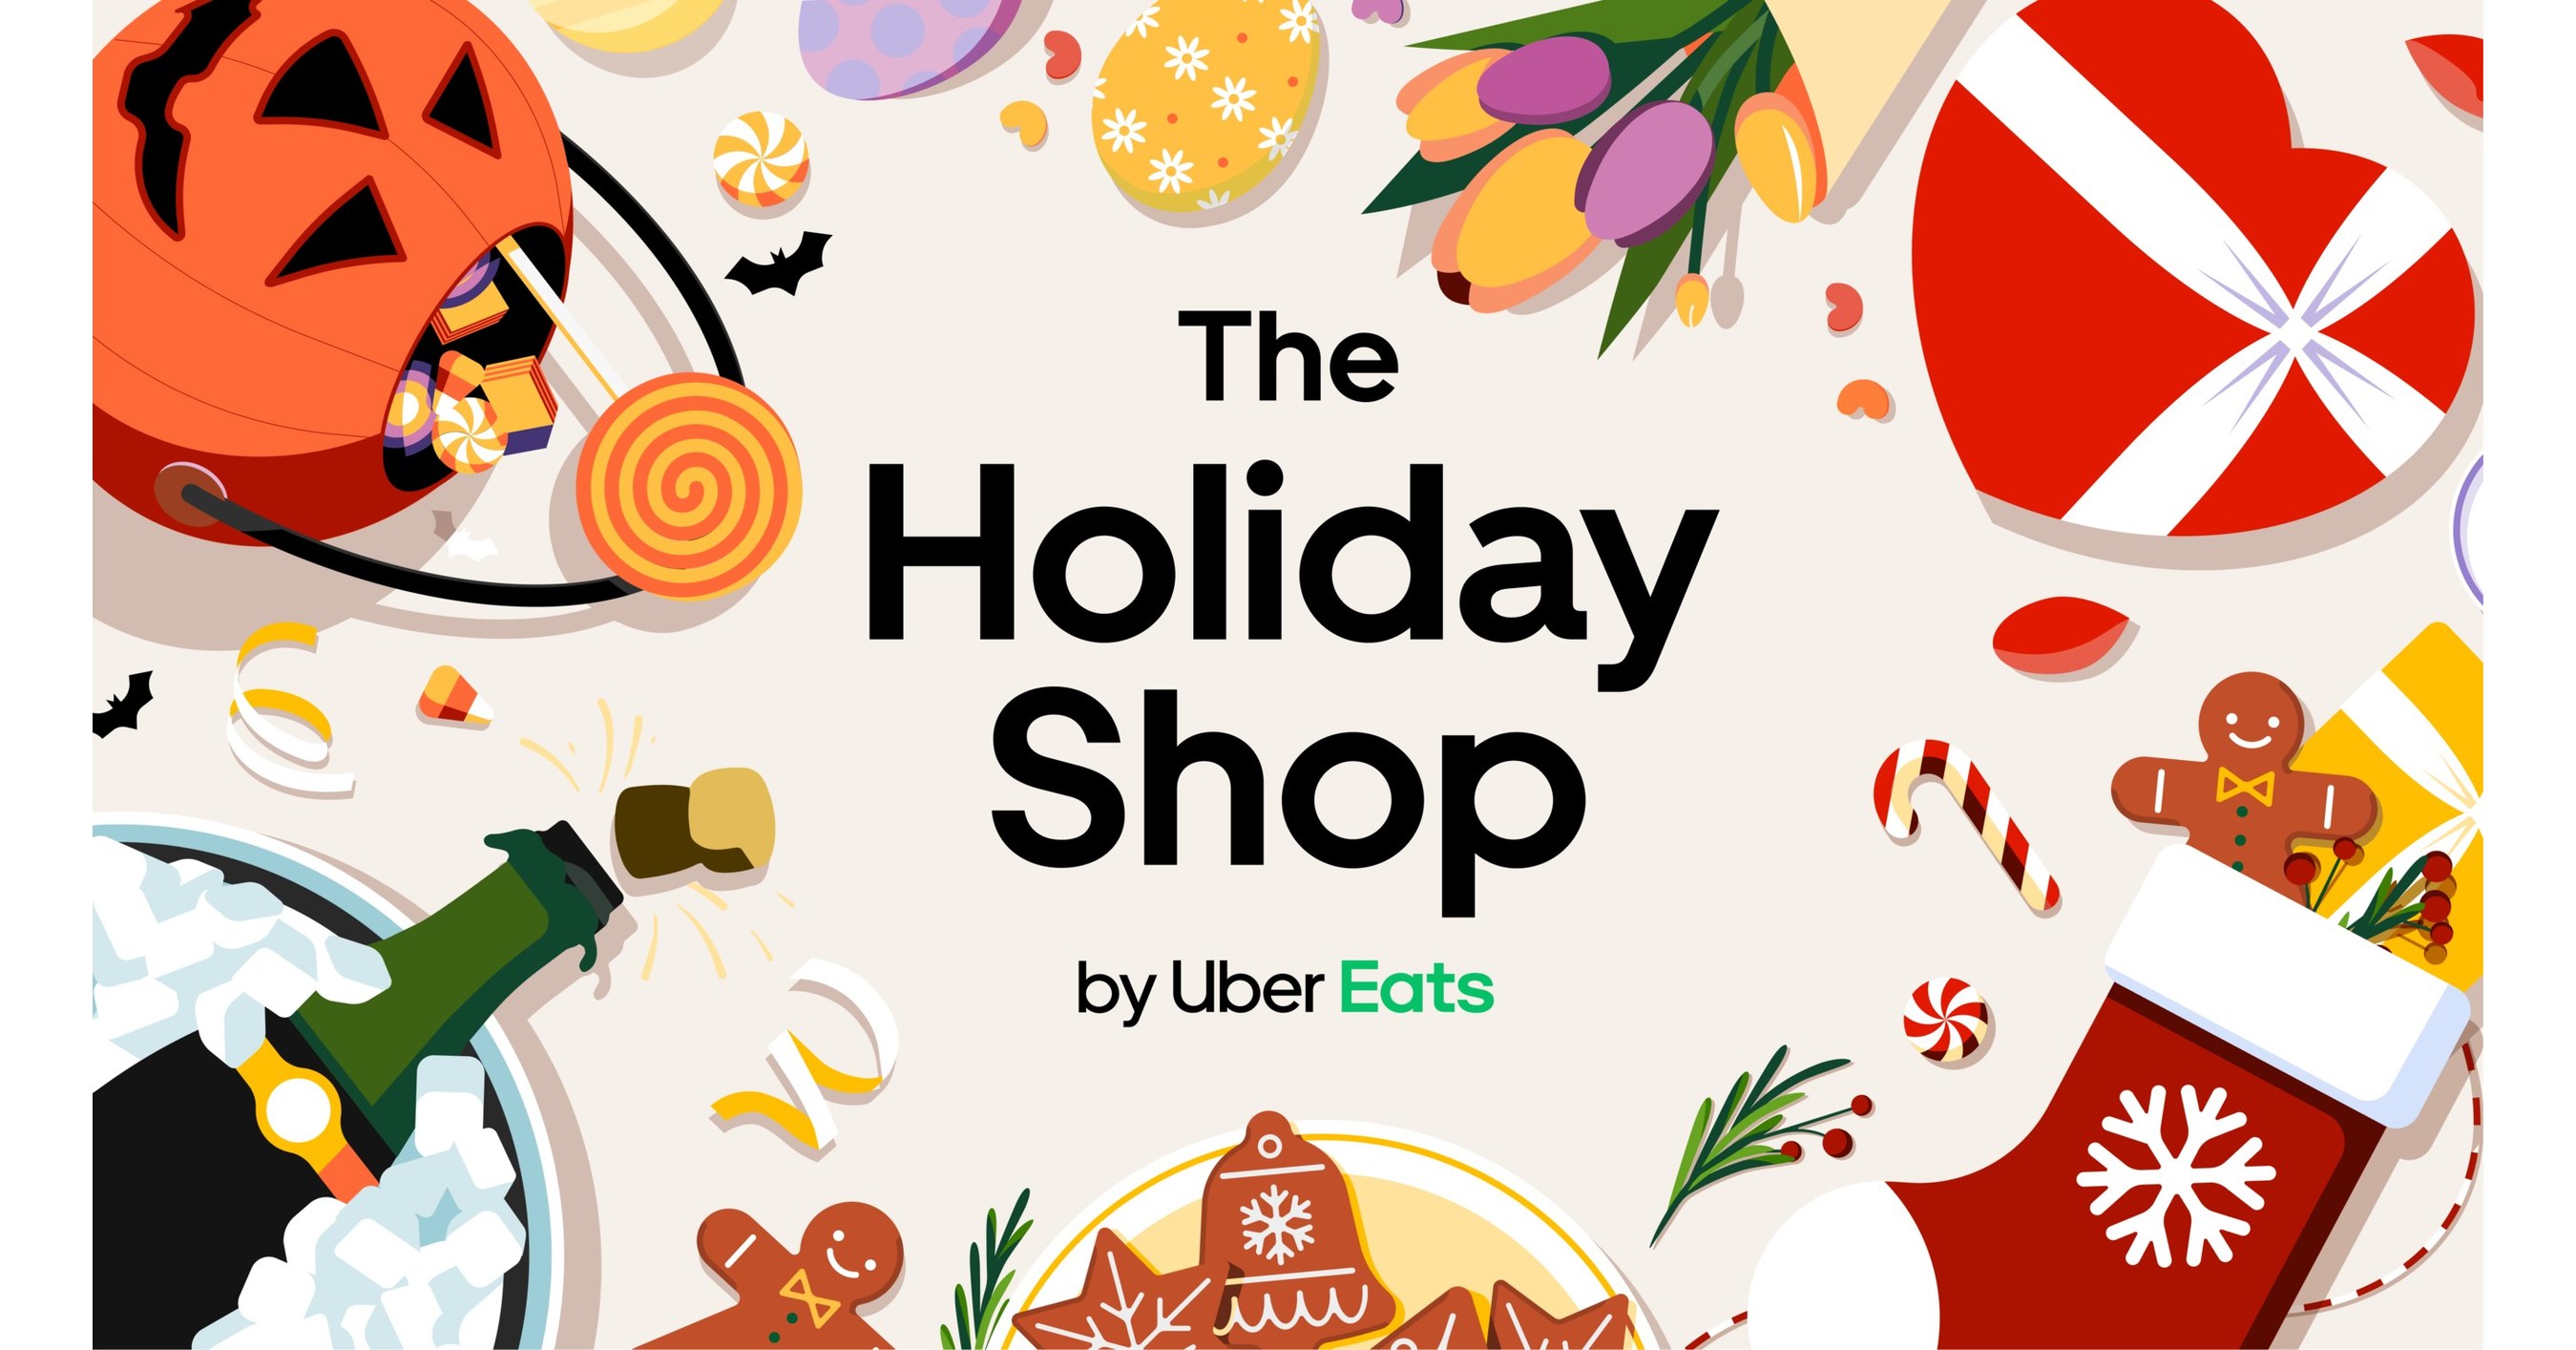 Uber Launches "The Holiday Shop" for OnDemand Seasonal Delivery